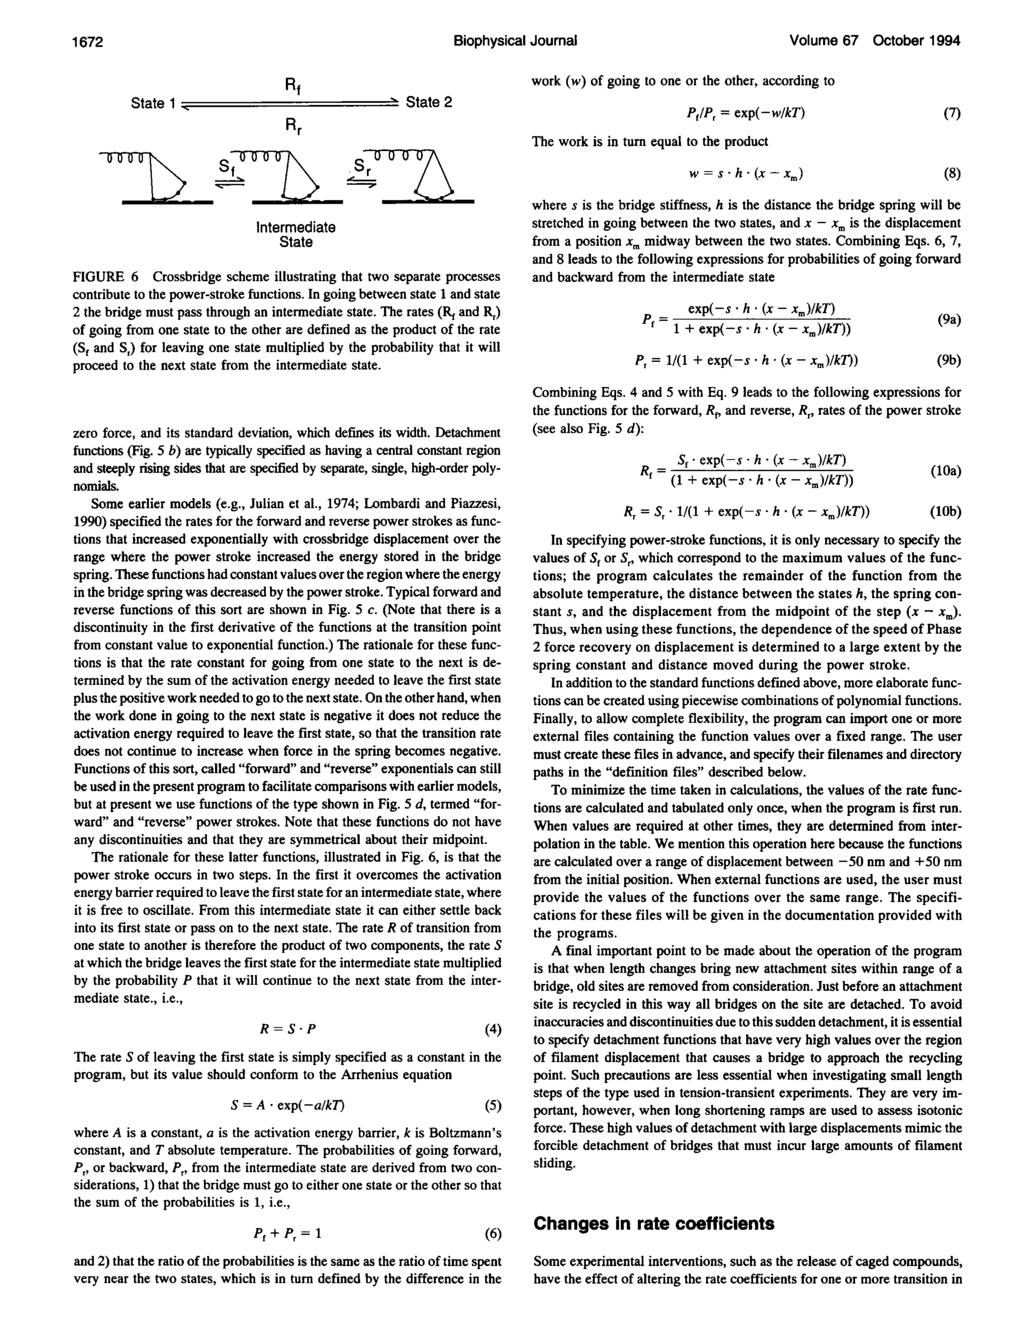 1 672 Biophysical Journal Volume 67 October 1994 u 0 a 0 State 1 s a 0 a a f NZ Intermediate State State 2 FIGURE 6 Crossbridge scheme illustrating that two separate processes contribute to the